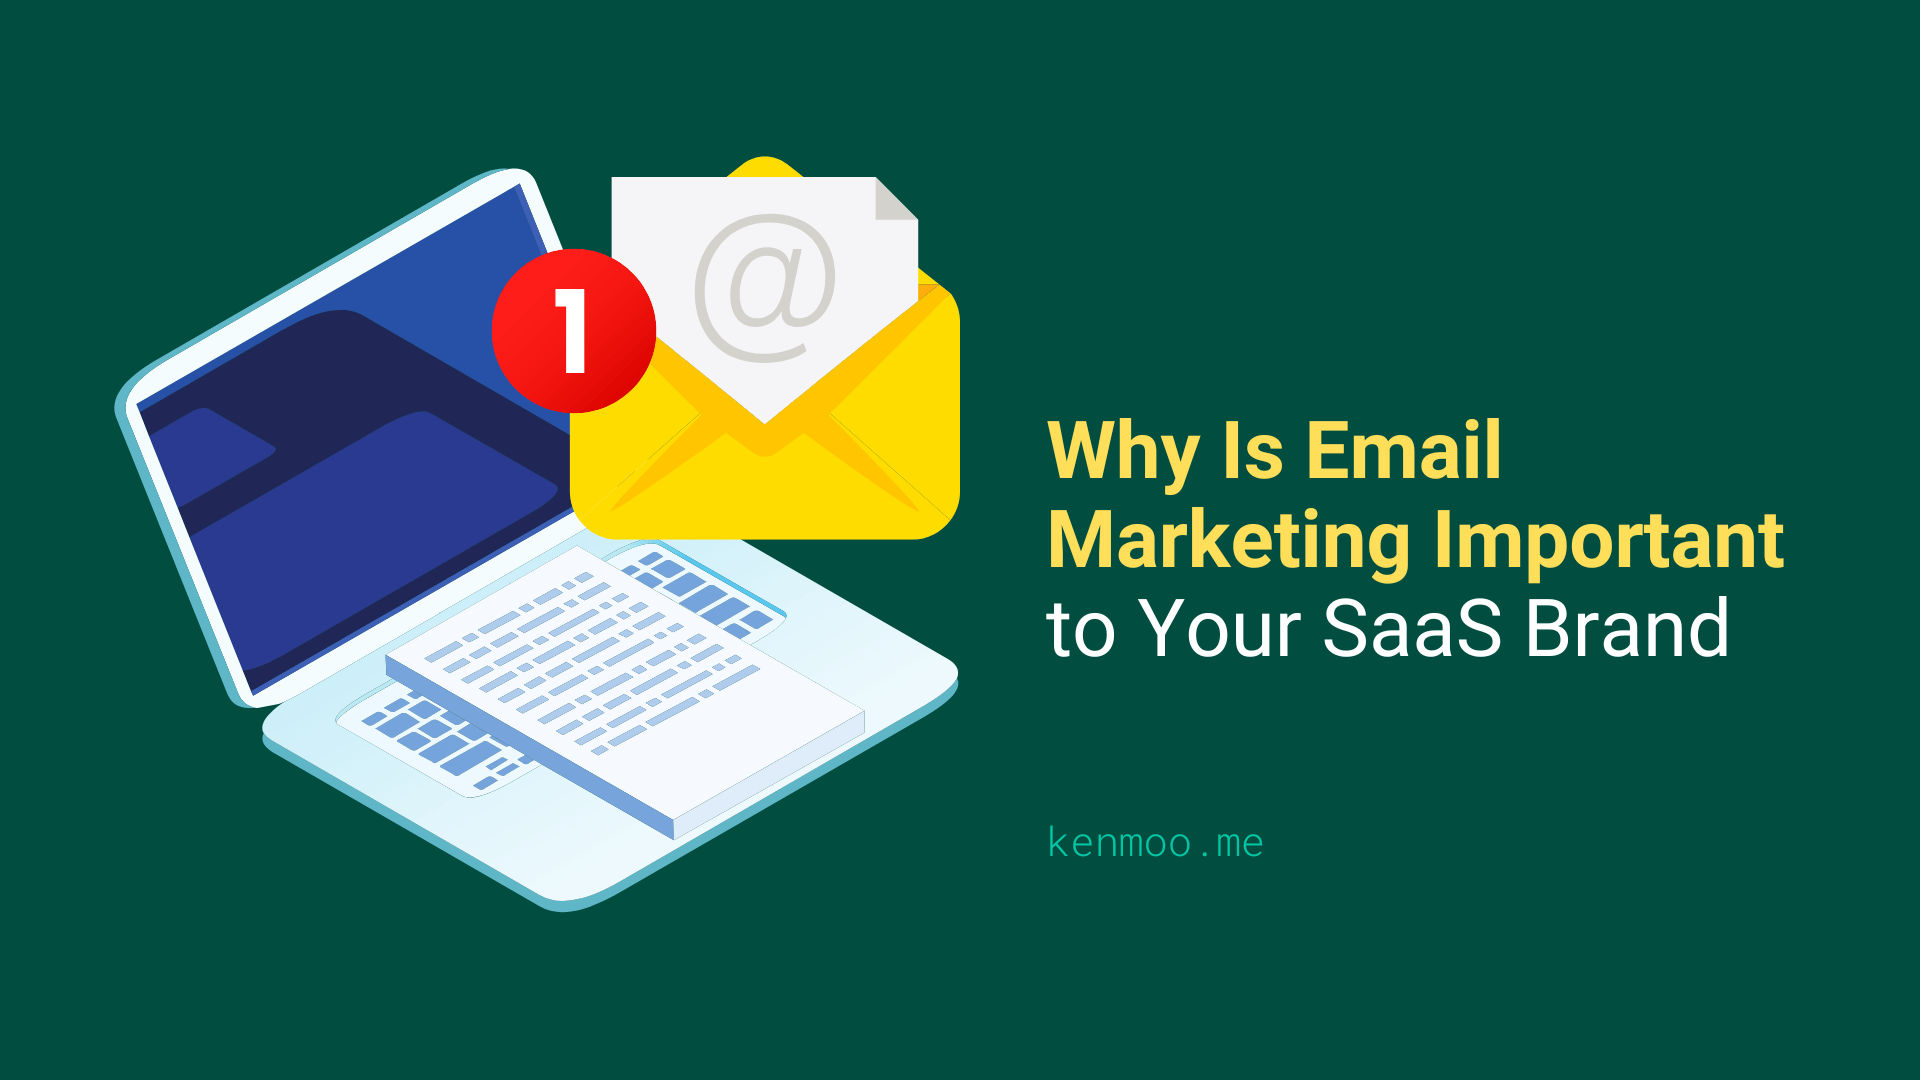 Why Is Email Marketing Important to Your SaaS Brand